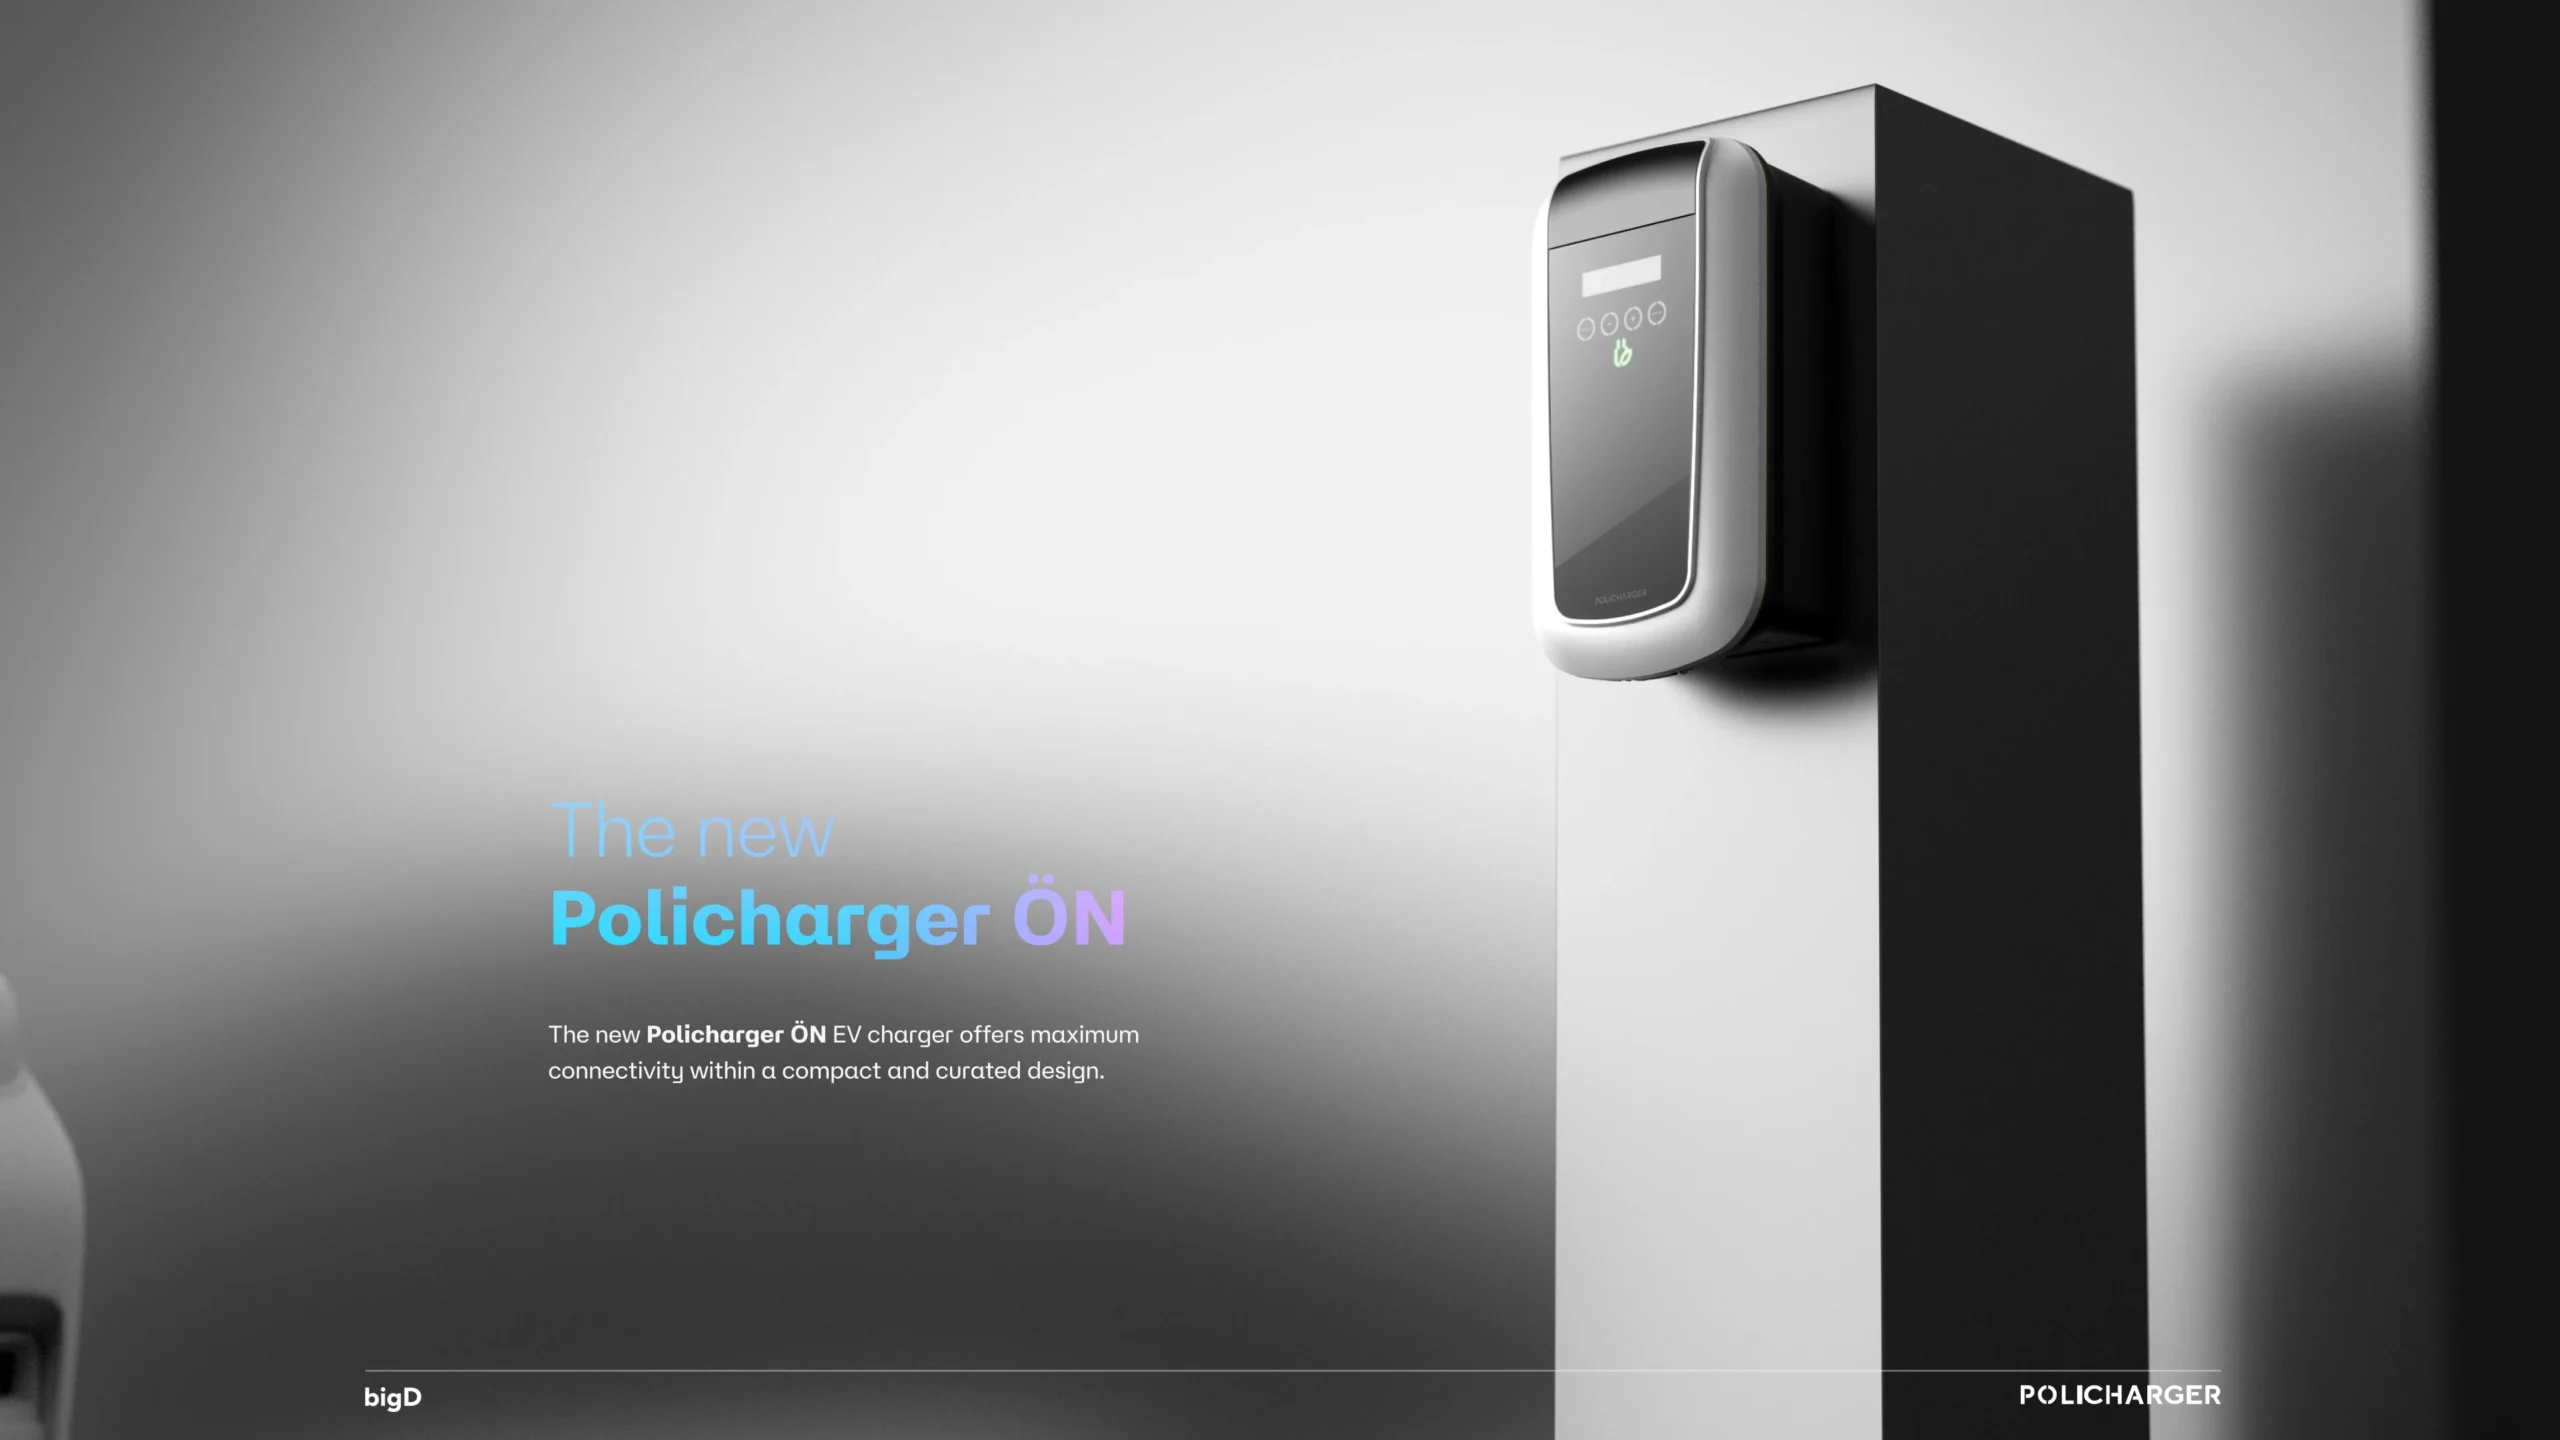 The new Policharger ÖN EV charger offers maximum connectivity within a compact and curated design.